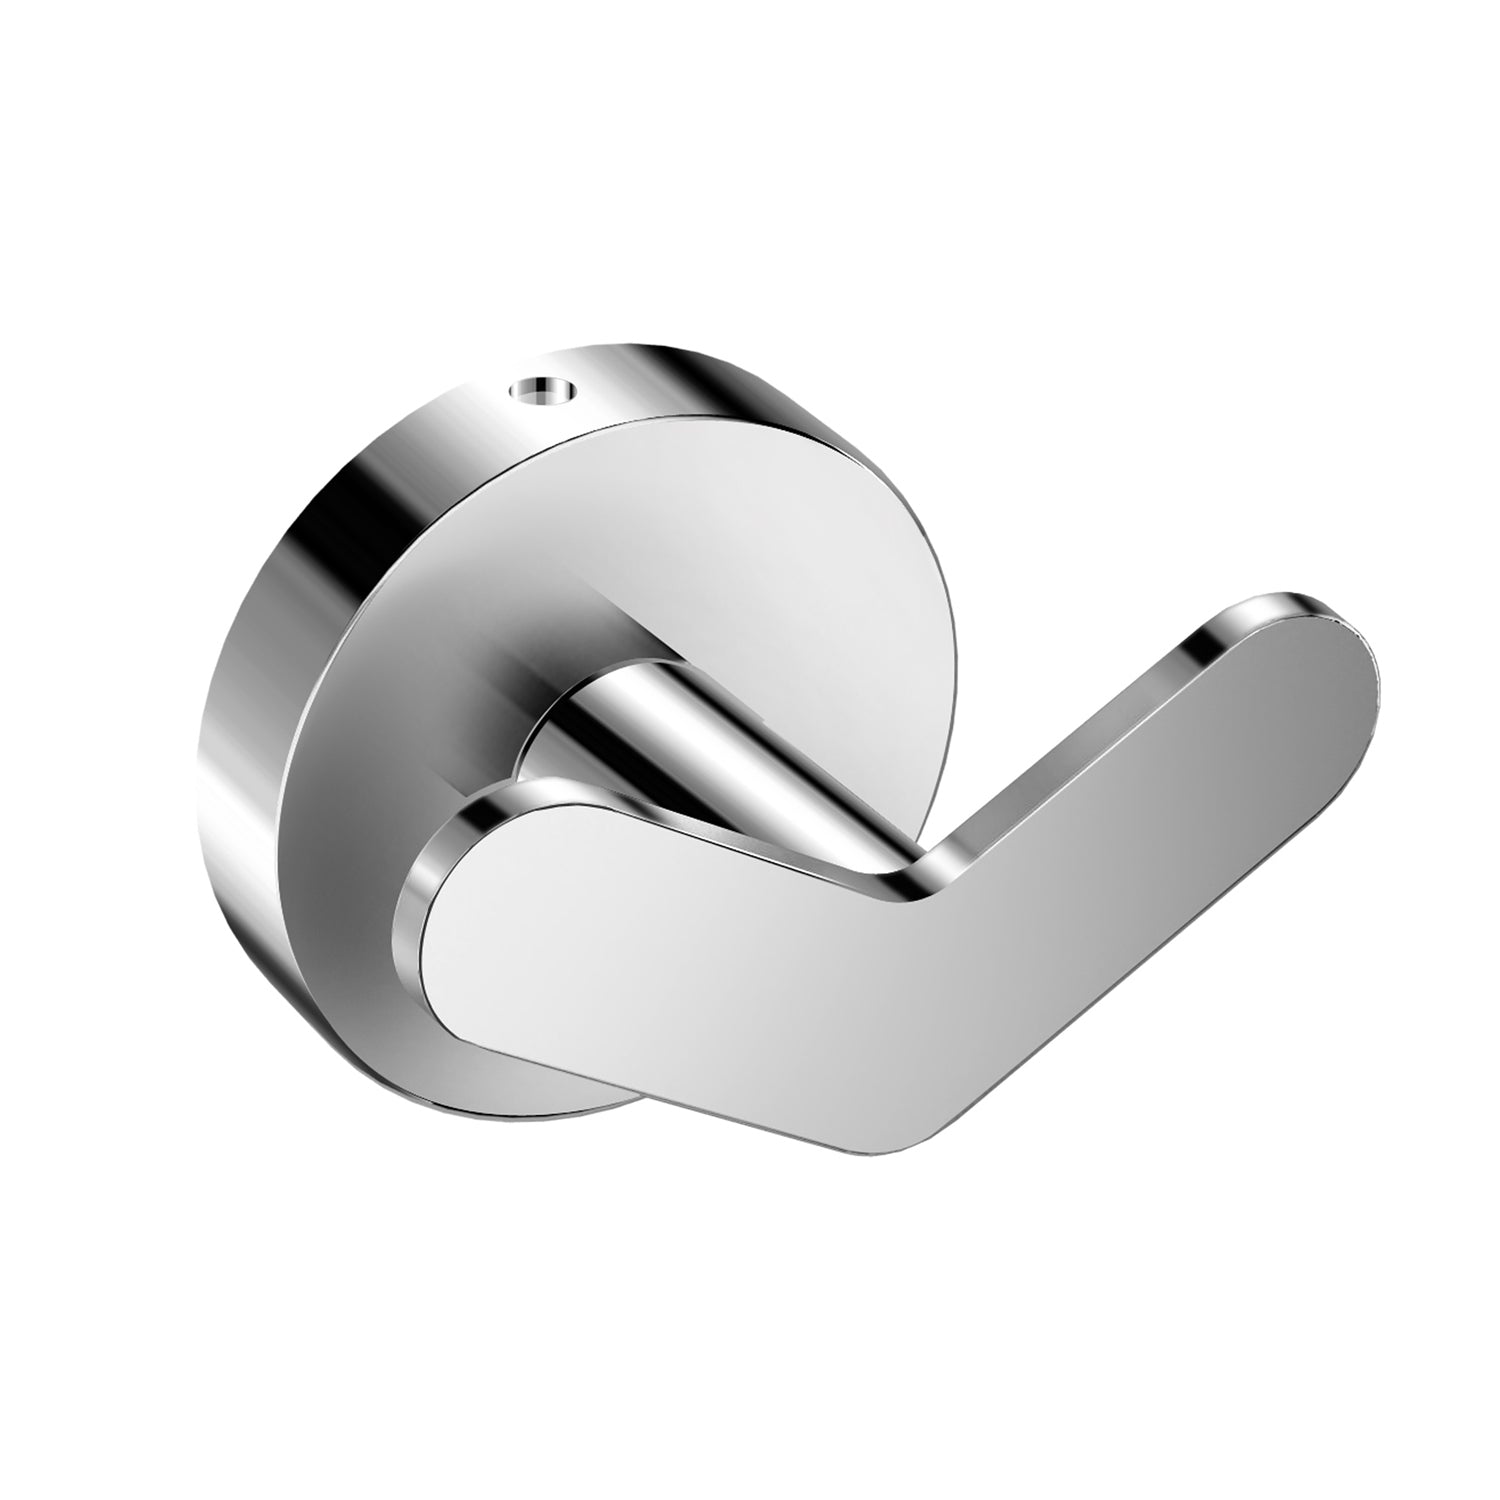 DAX Valencia Towel Hook, Wall Mount Stainless Steel, Chrome Finish, 2-9/16 x 2 x 1-9/16 Inches (DAX-GDC120122-CR)